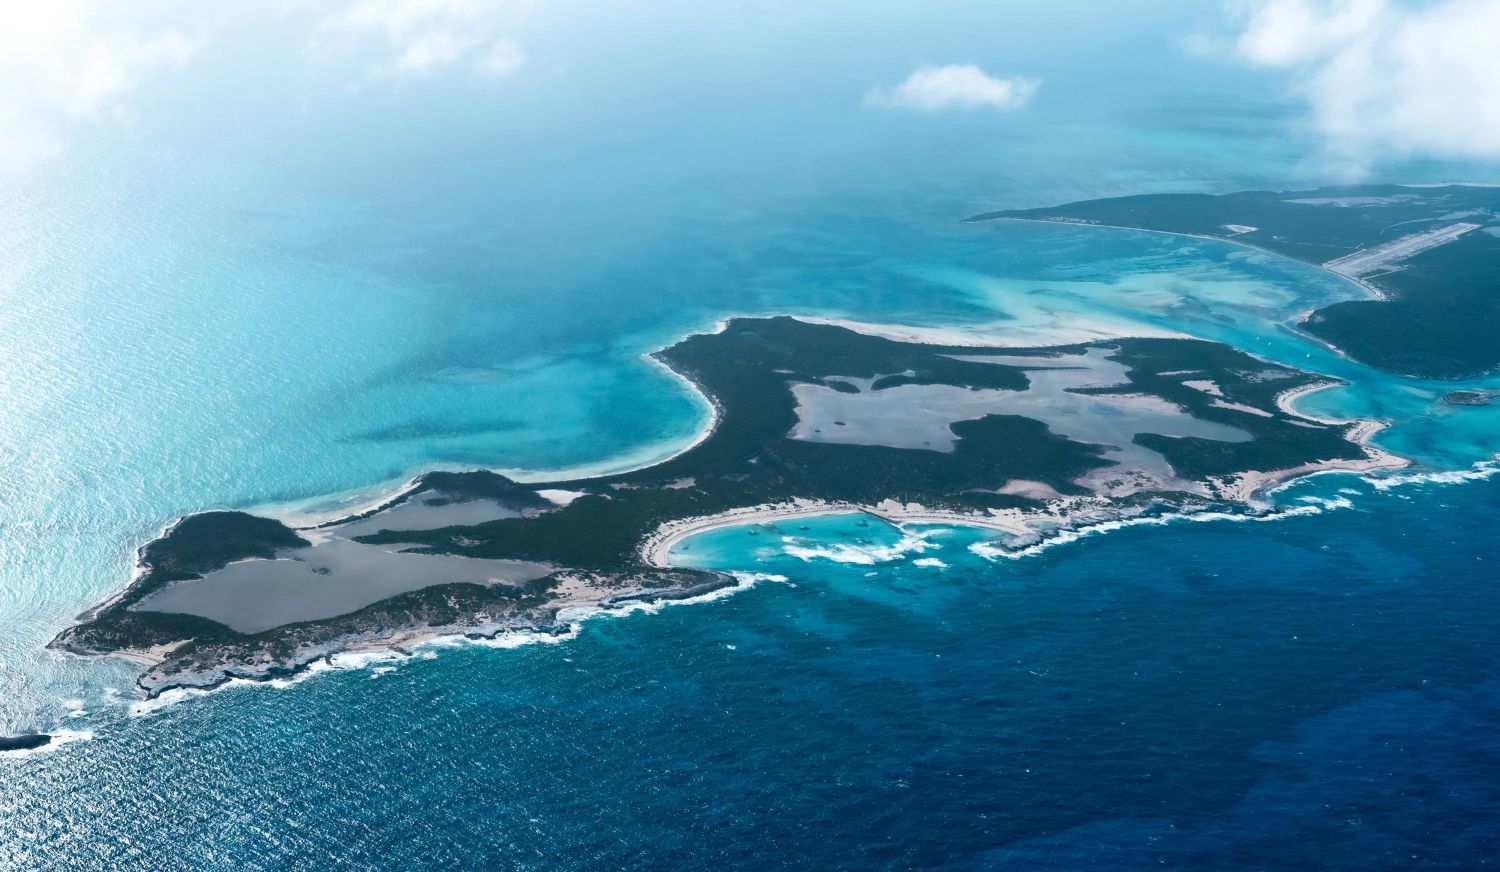 The 730-acre Little Ragged Island in the Bahamas is being auctioned off to the highest bidder